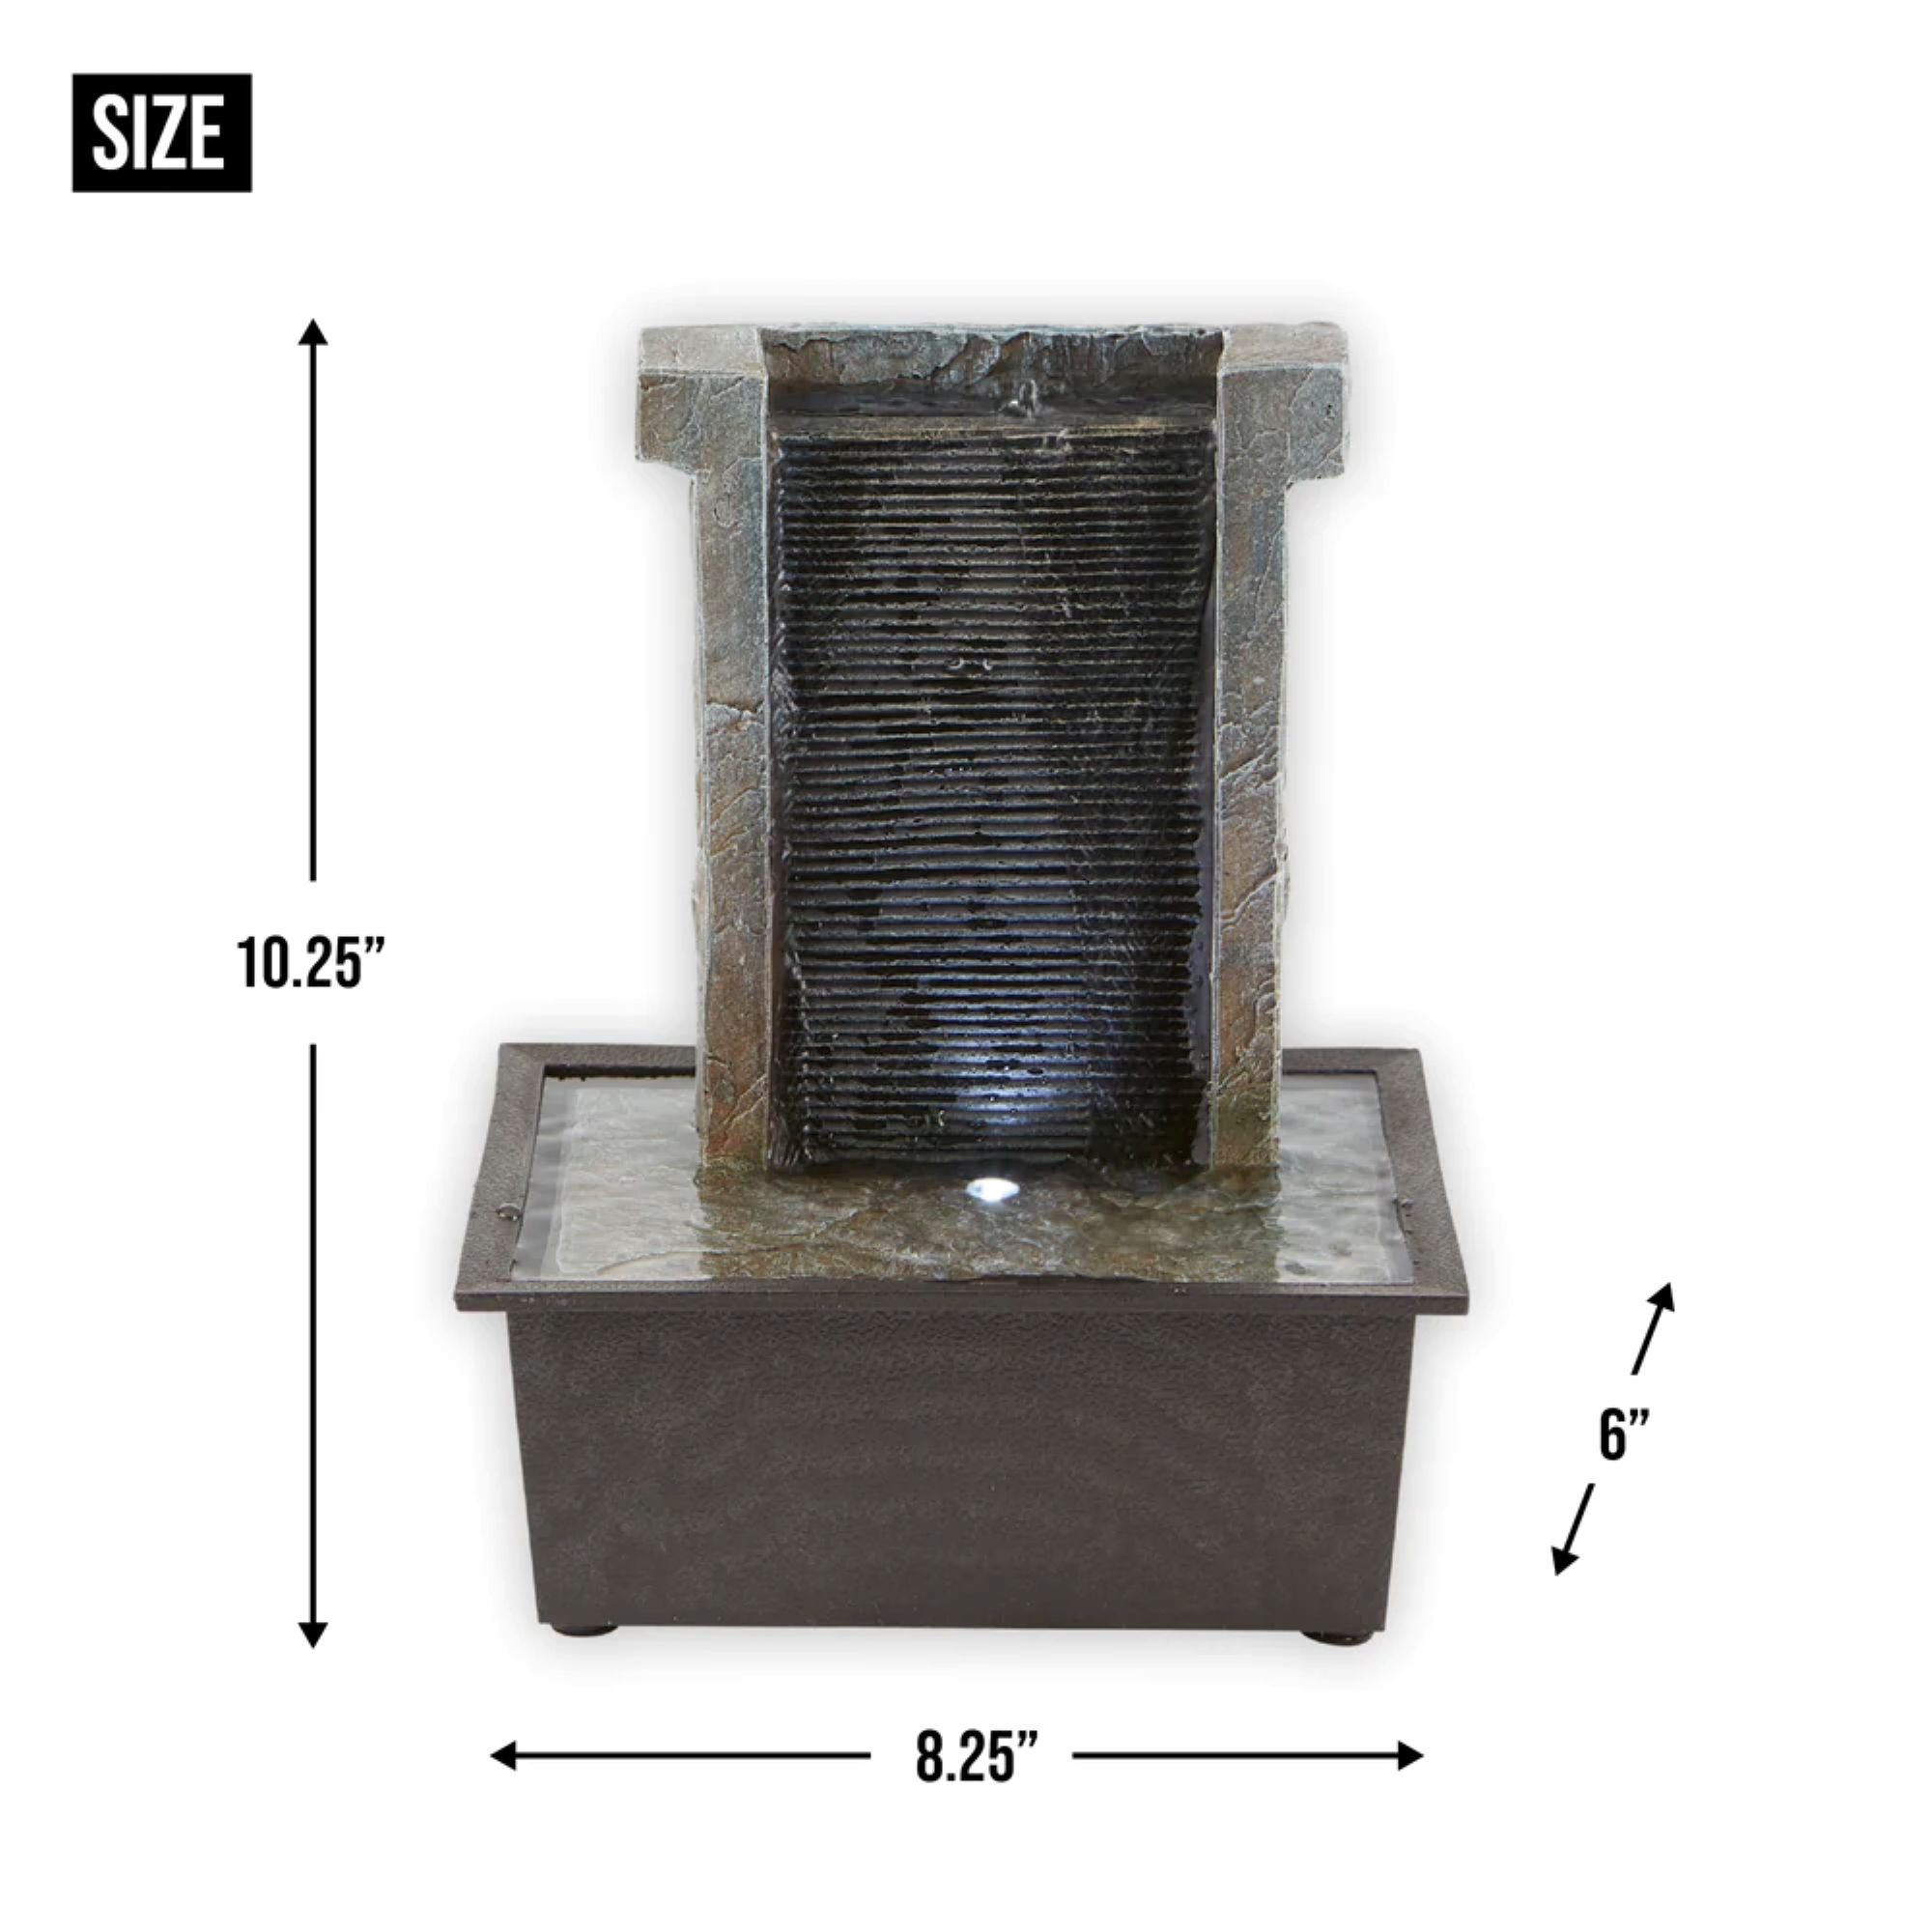 Zingz & Thingz LED Lighted Stone Wall Tabletop Fountain - 10.25" - Black